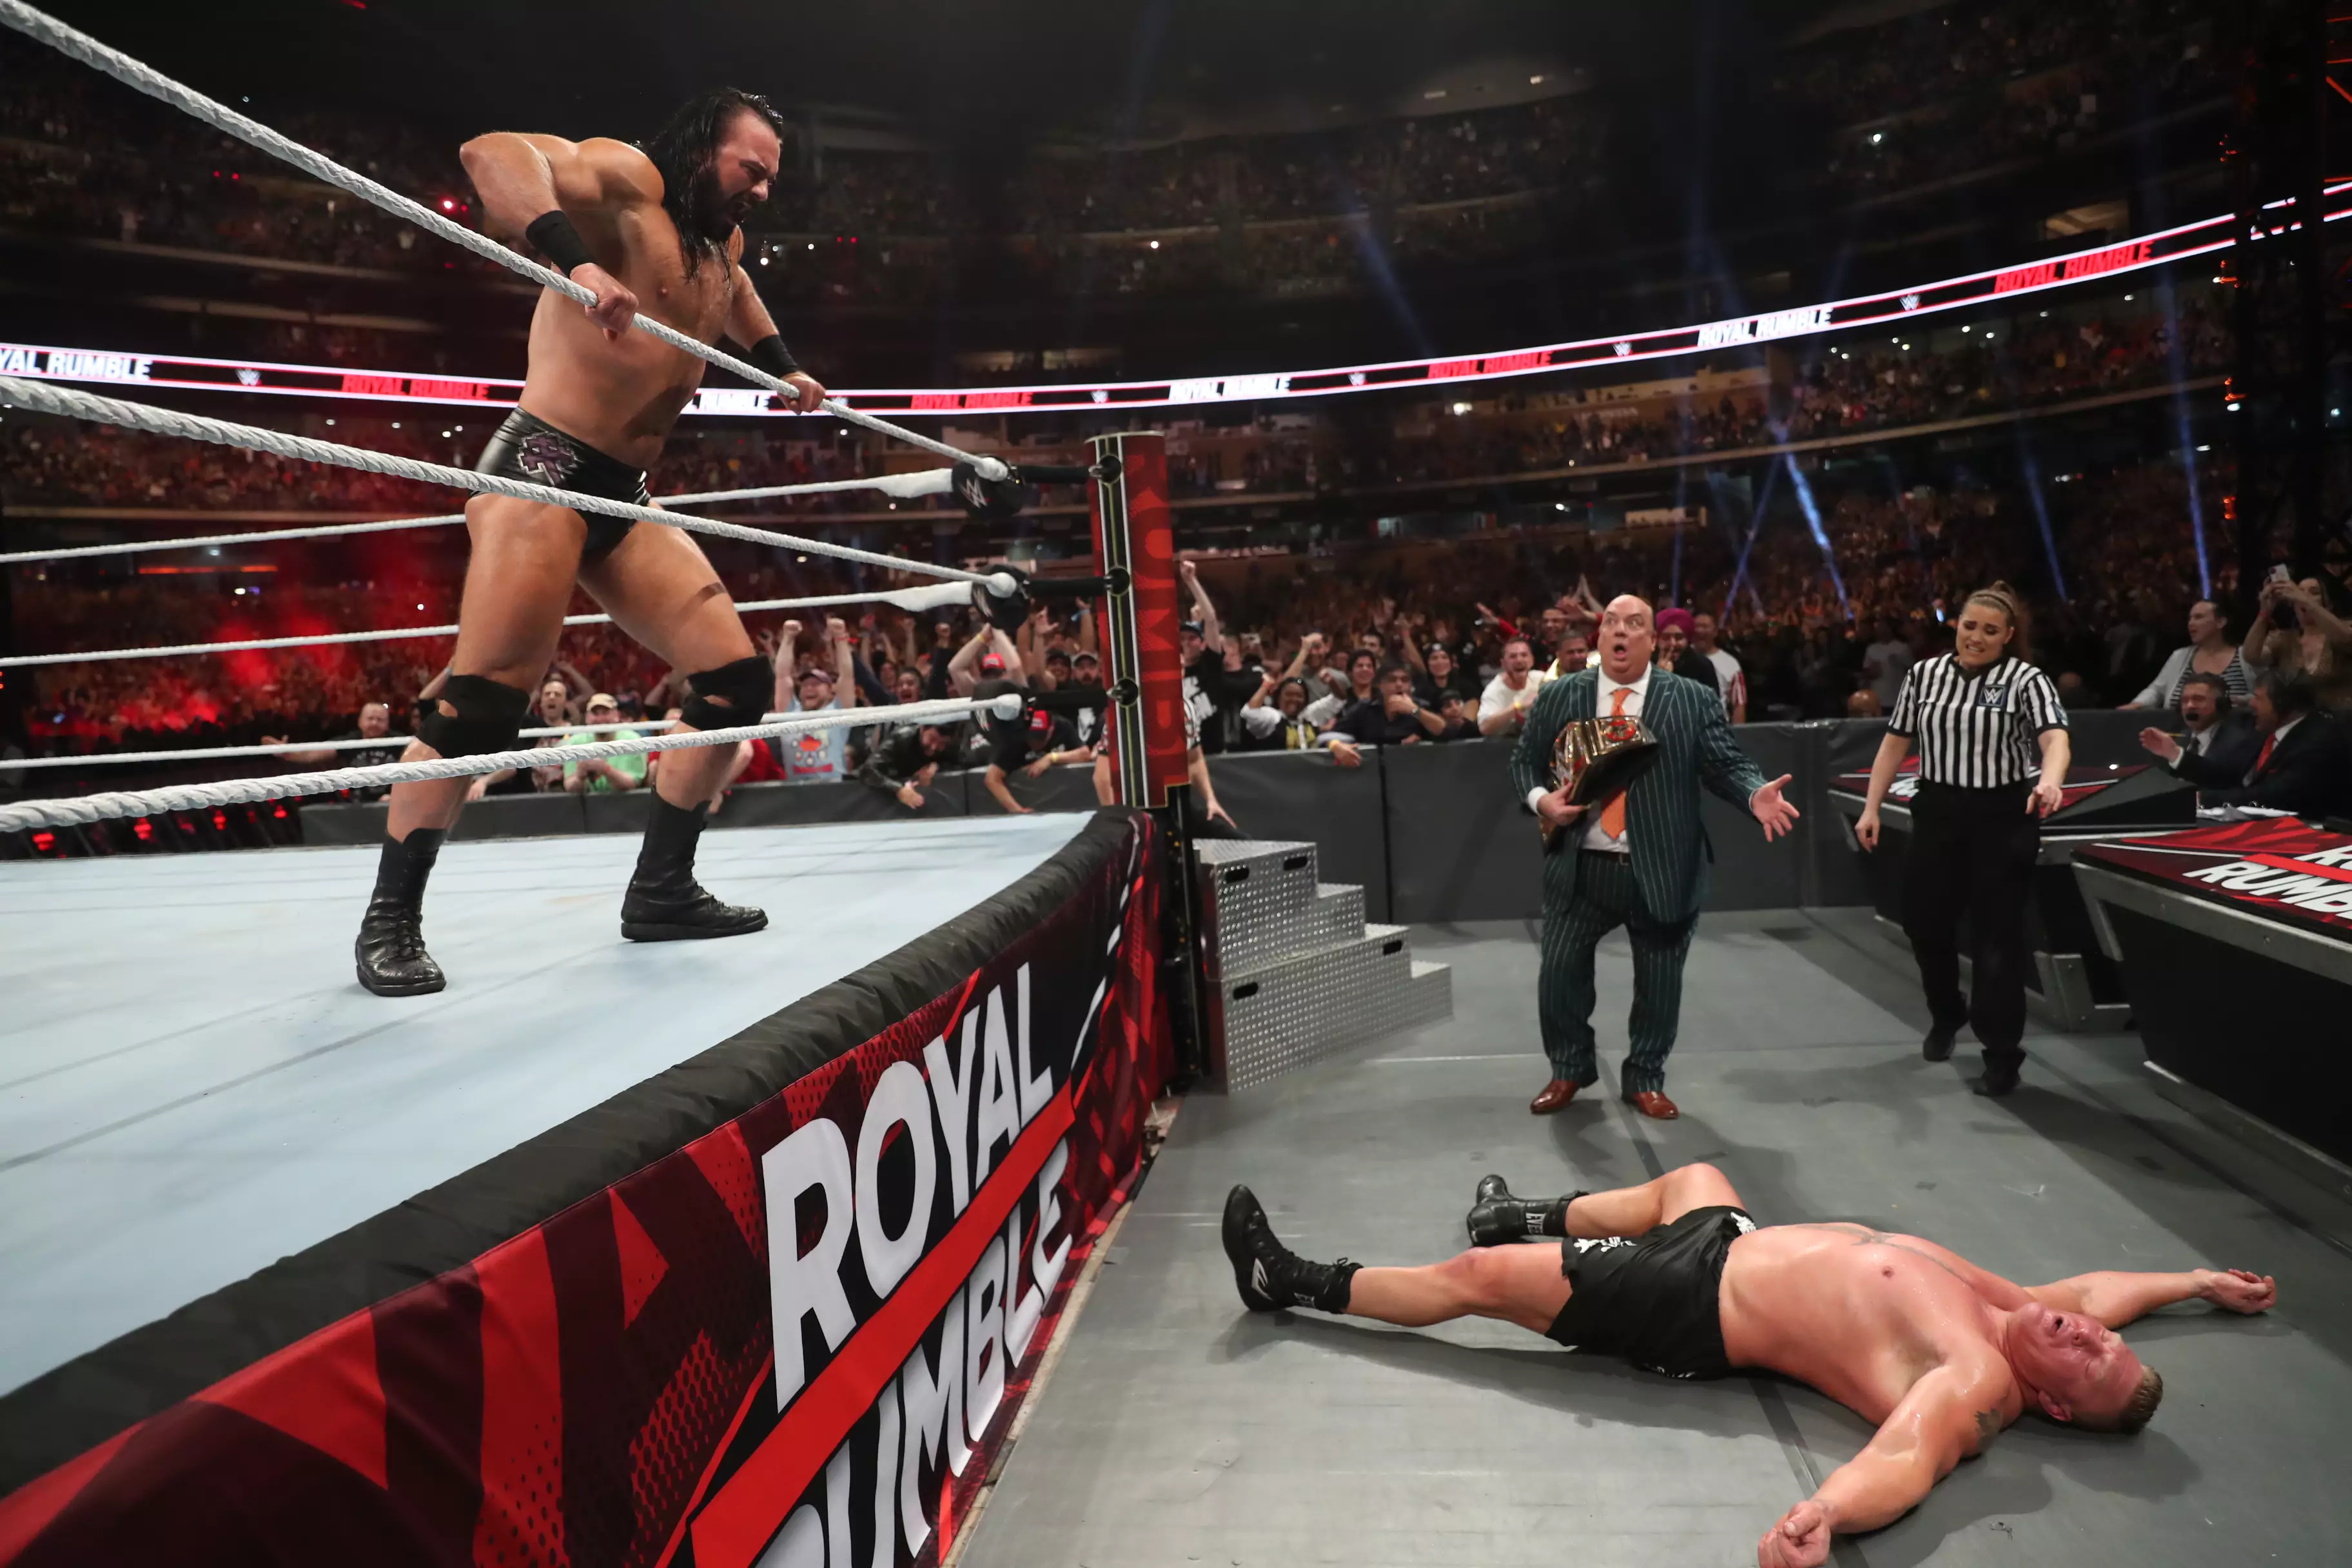 McIntyre eliminated Lesnar from this year's Royal Rumble match. (Image